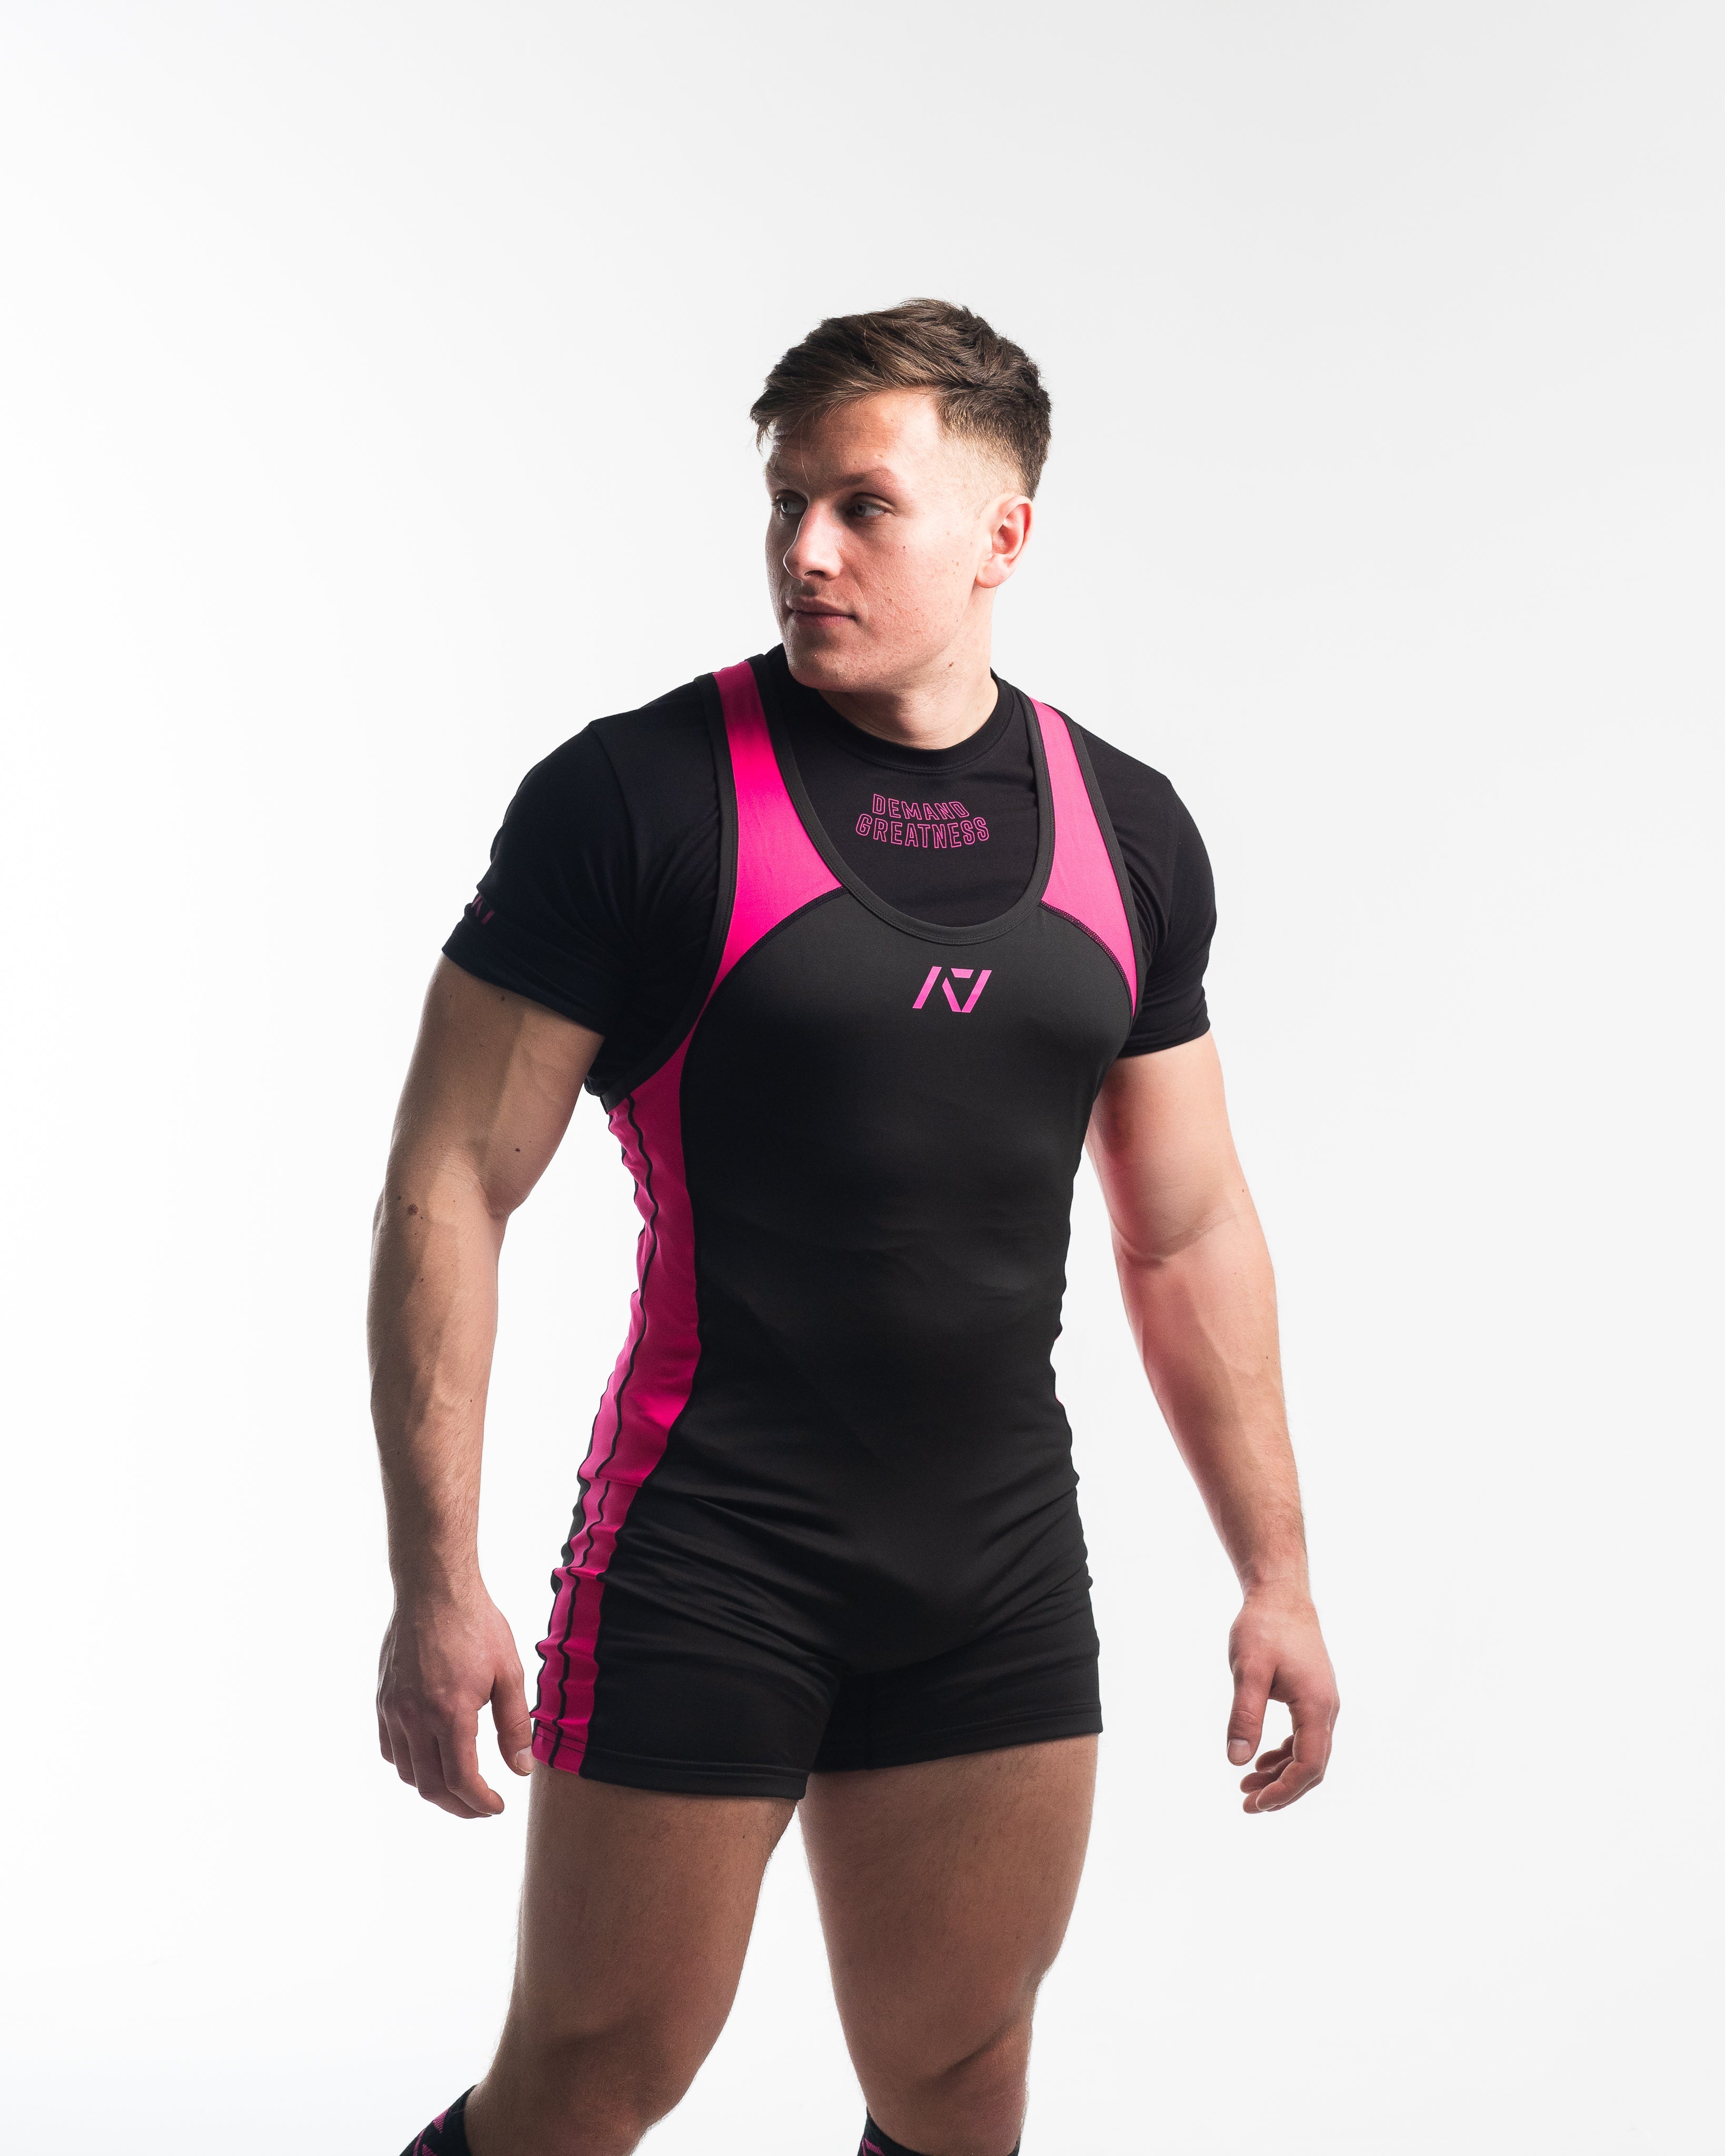 A7 IPF Approved Flamingo Luno singlet features extra lat mobility, side panel stitching to guide the squat depth level and curved panel design for a slimming look. The Women's cut singlet features a tapered waist and additional quad room. The IPF Approved Kit includes Luno Powerlifting Singlet, A7 Meet Shirt, A7 Zebra Wrist Wraps, A7 Deadlift Socks, Hourglass Knee Sleeves (Stiff Knee Sleeves and Rigor Mortis Knee Sleeves). All A7 Powerlifting Equipment shipping to UK, Norway, Switzerland and Iceland.